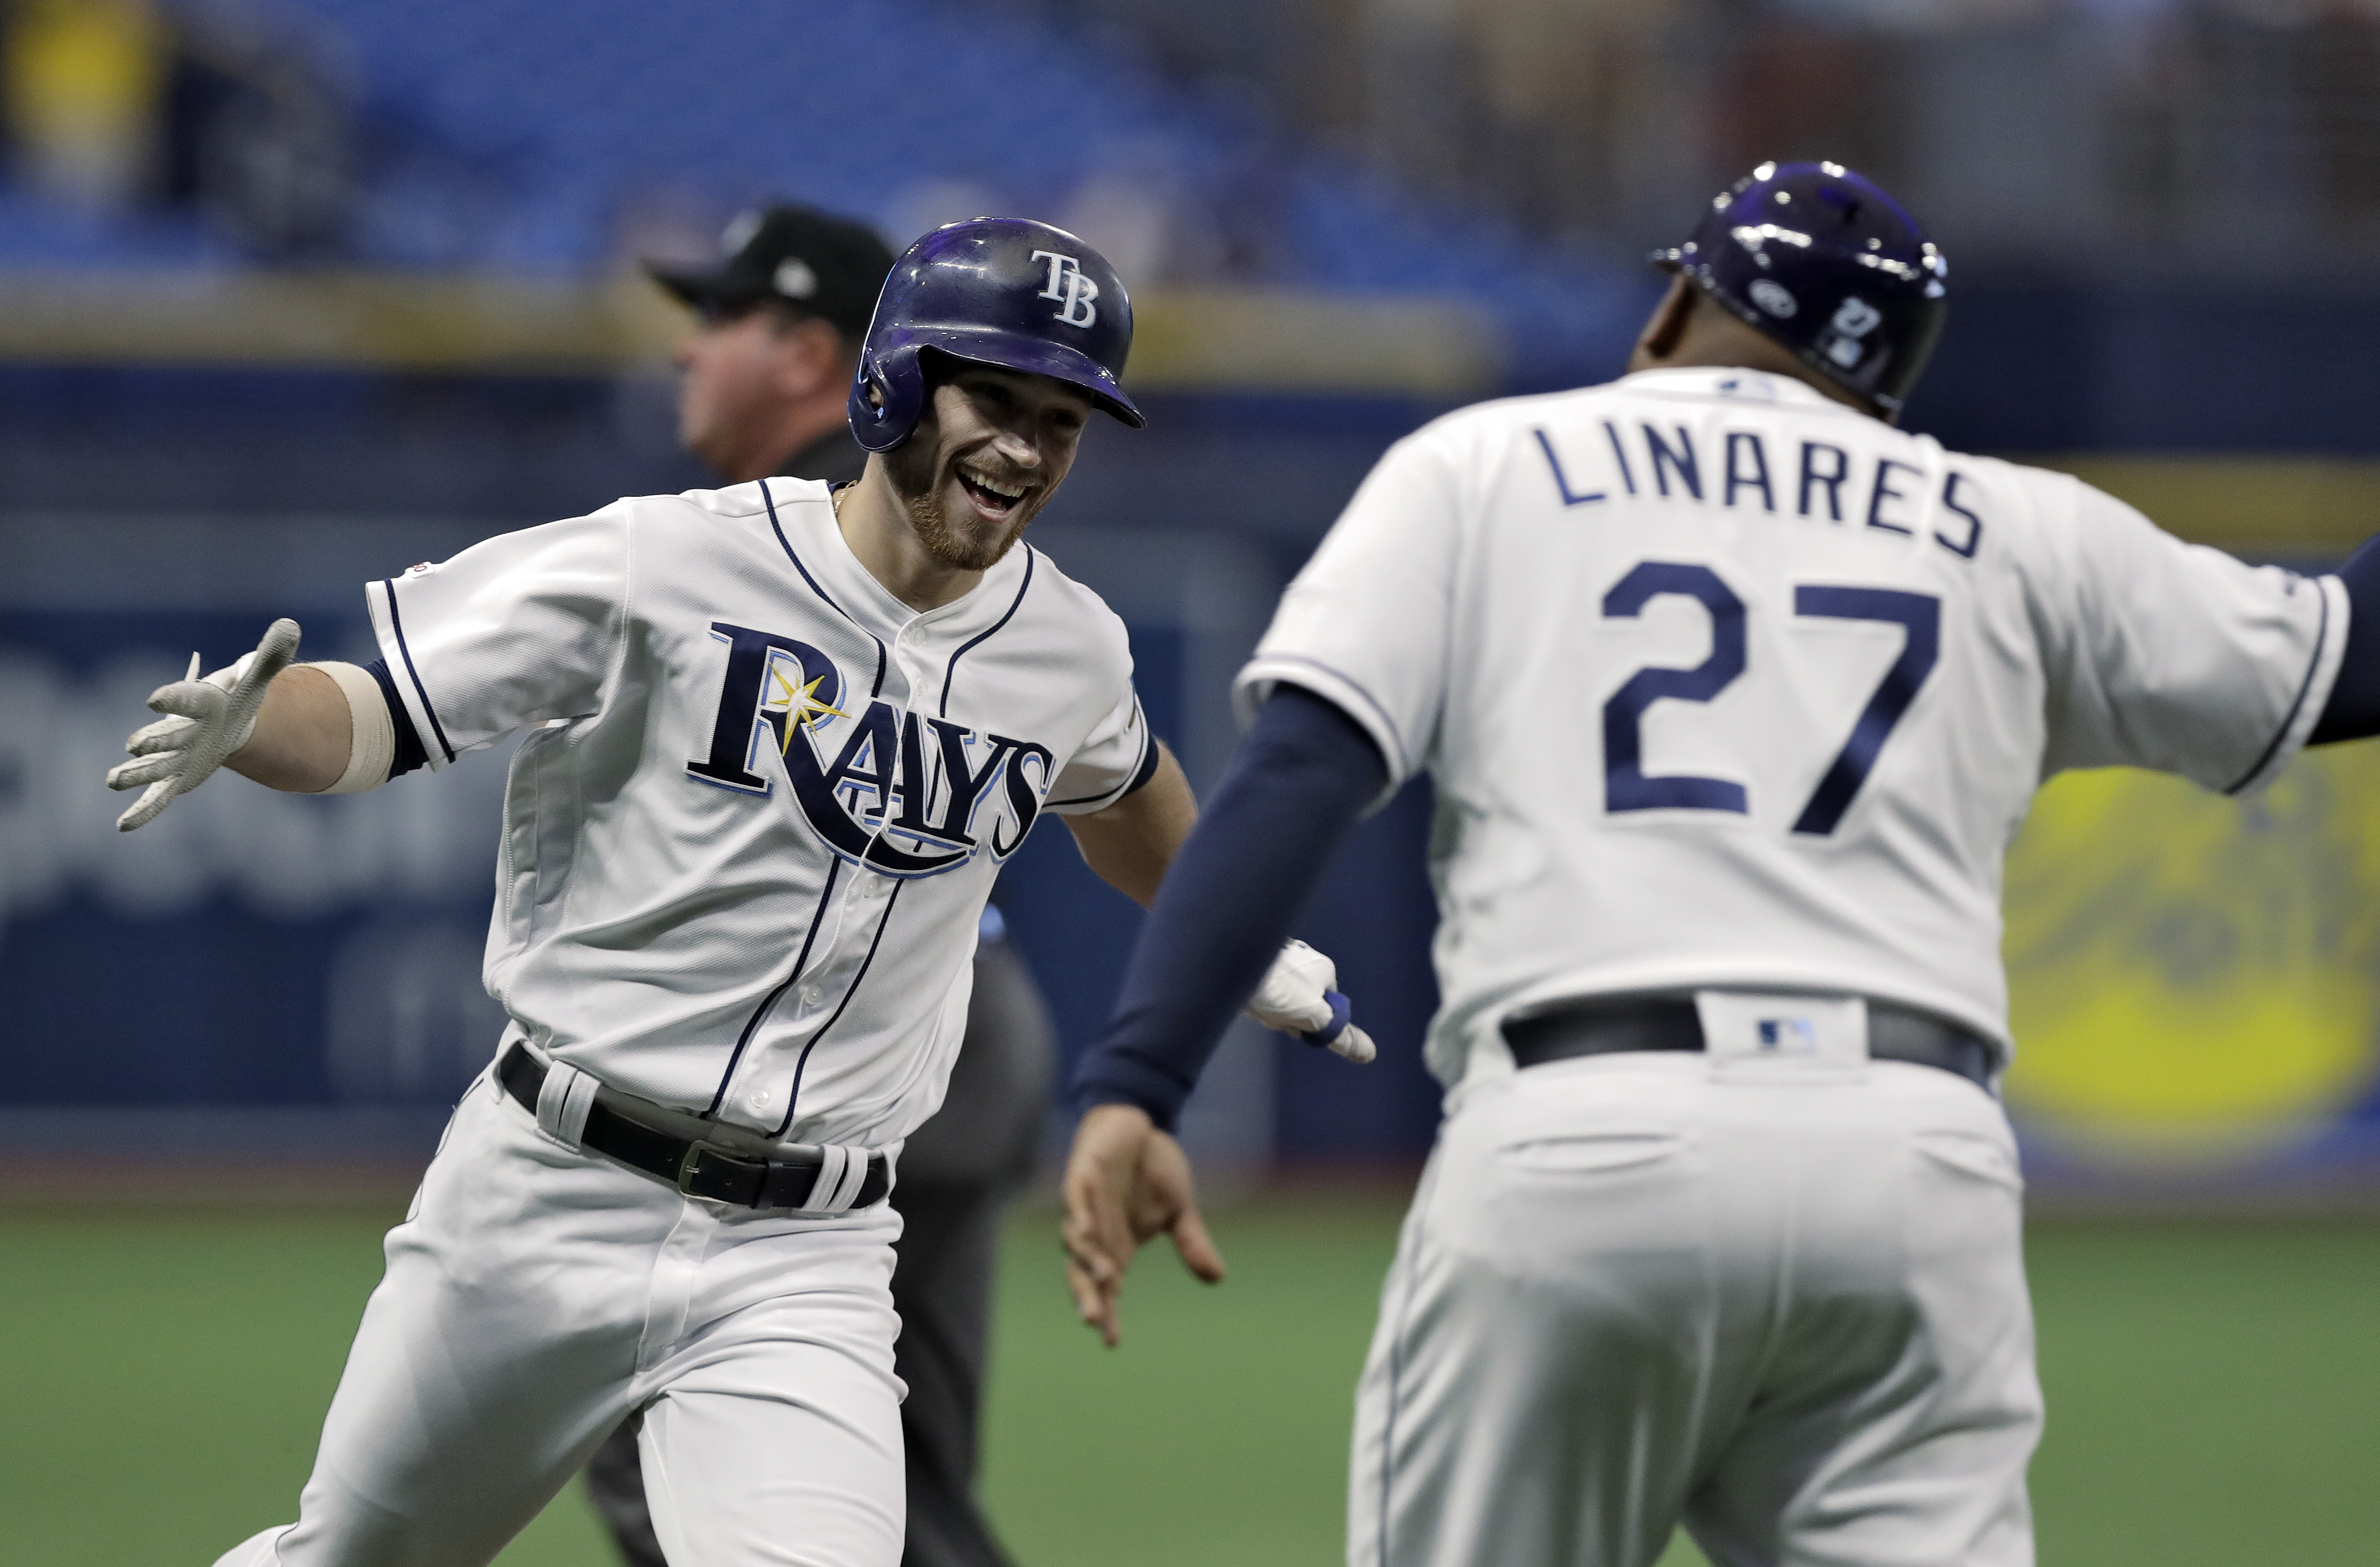 Rays Thriving On the Field Despite Continuing Ballpark Issues